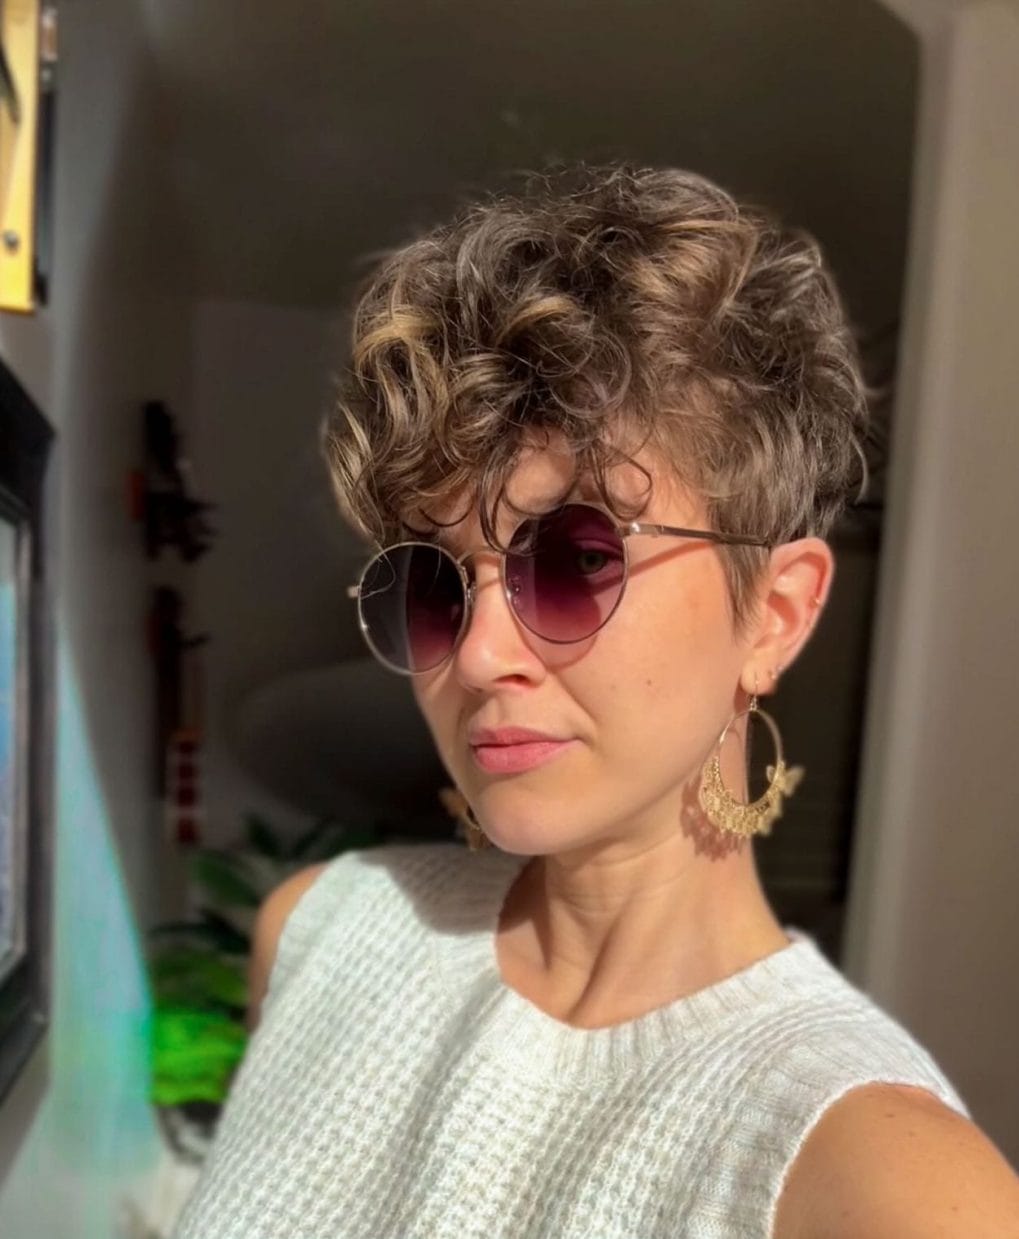 Playful short cut with wild curls and volume